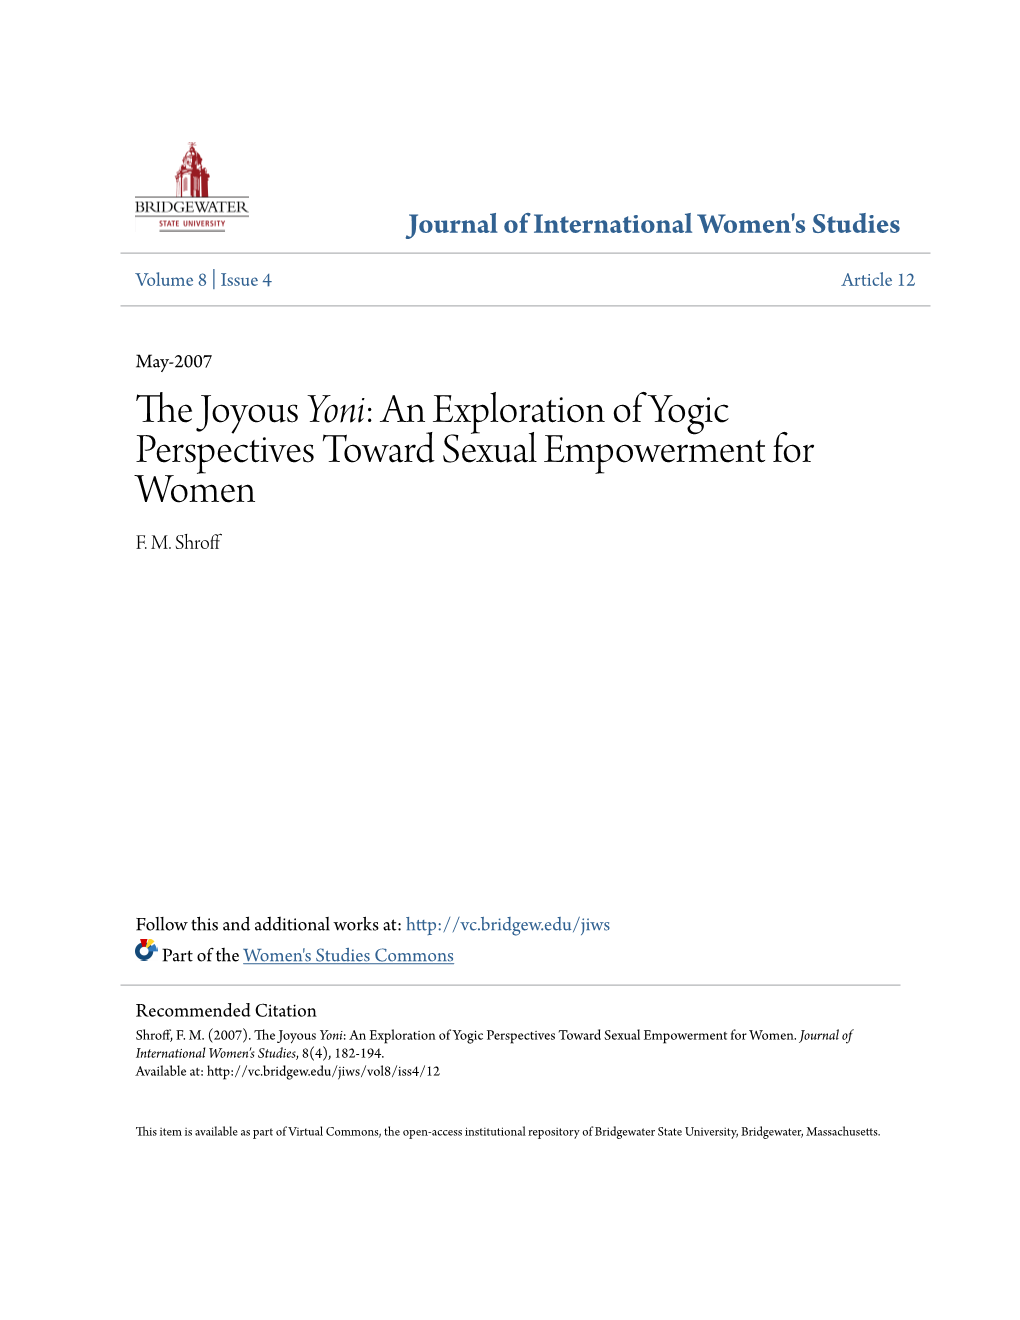 Yoni&lt;/Em&gt;: an Exploration of Yogic Perspectives Toward Sexual